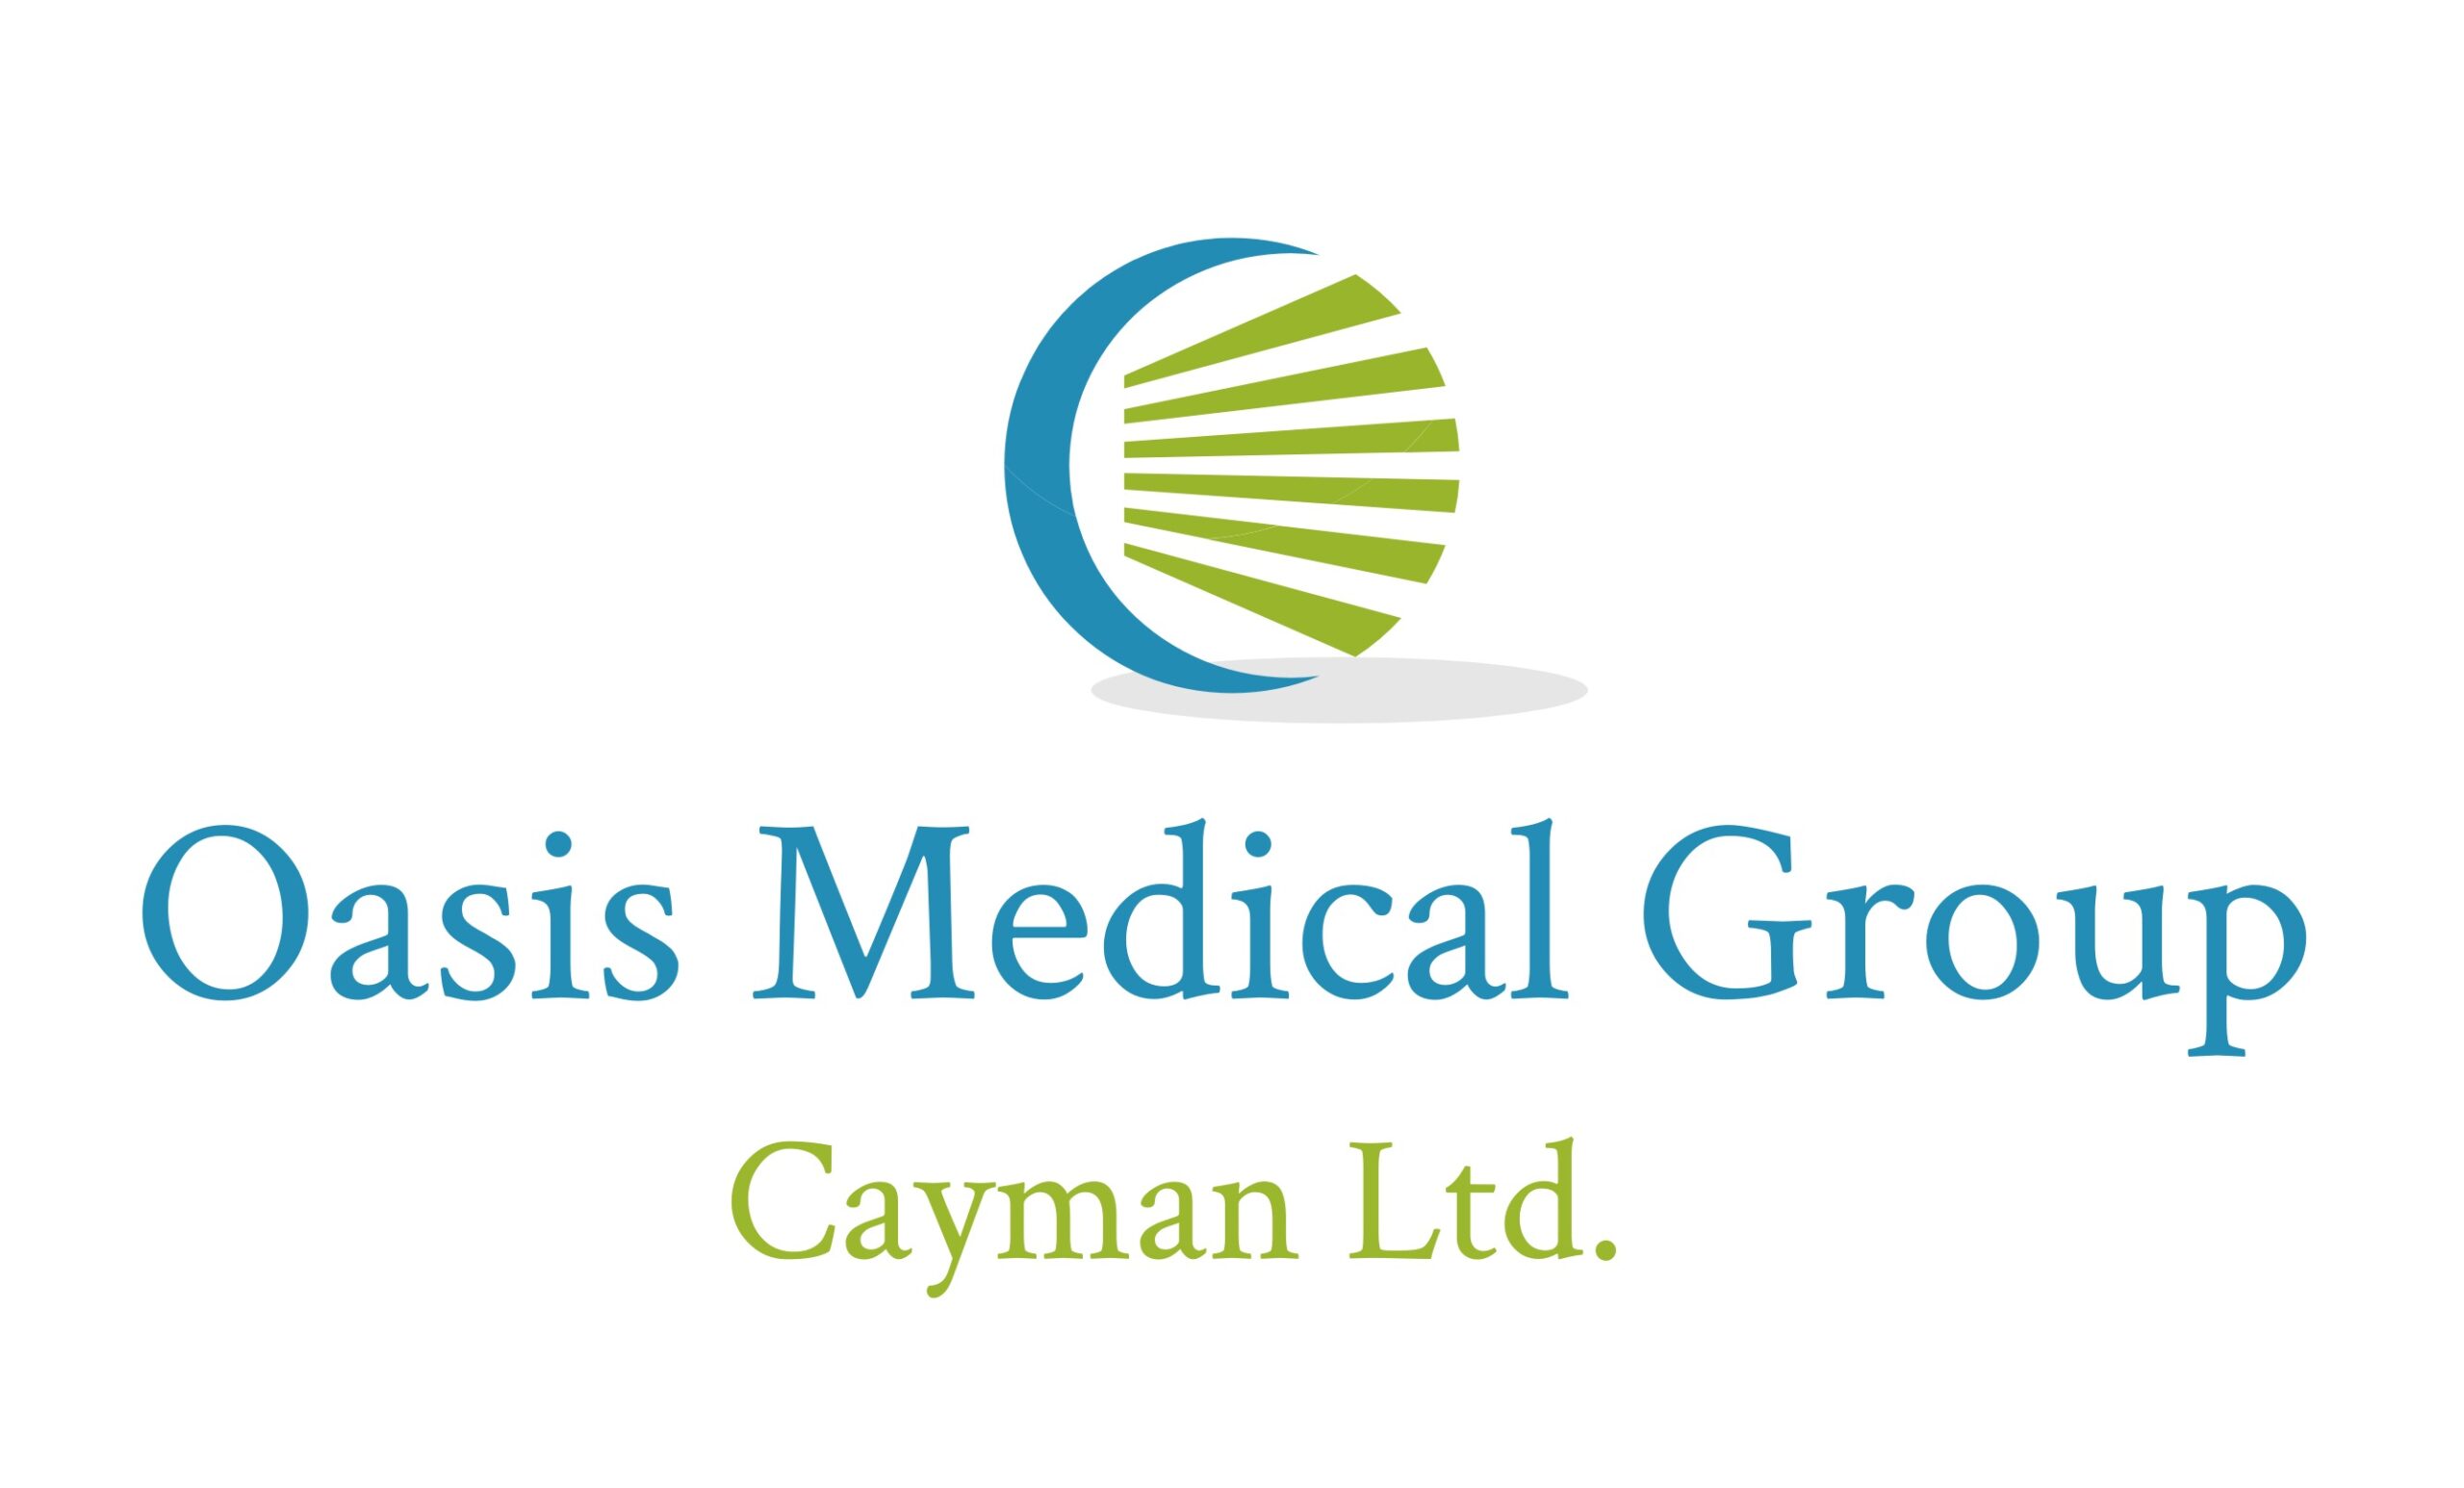 Oasis Medical Group|Services